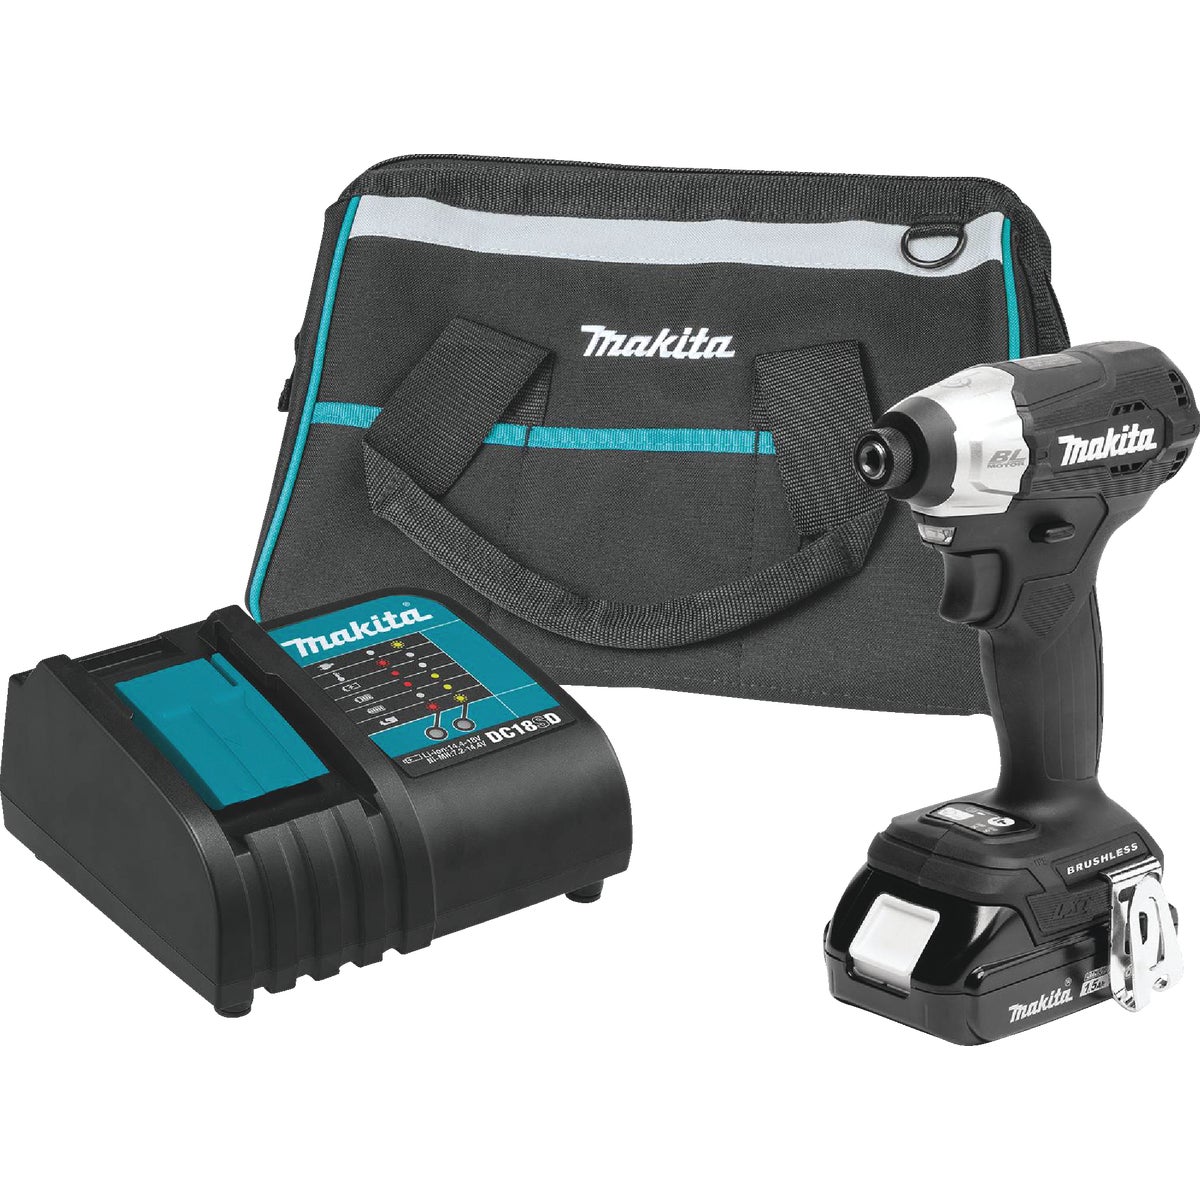 Makita 18-Volt LXT Lithium-Ion Brushless 1/4 In. Hex Sub-Compact Cordless Impact Driver Kit